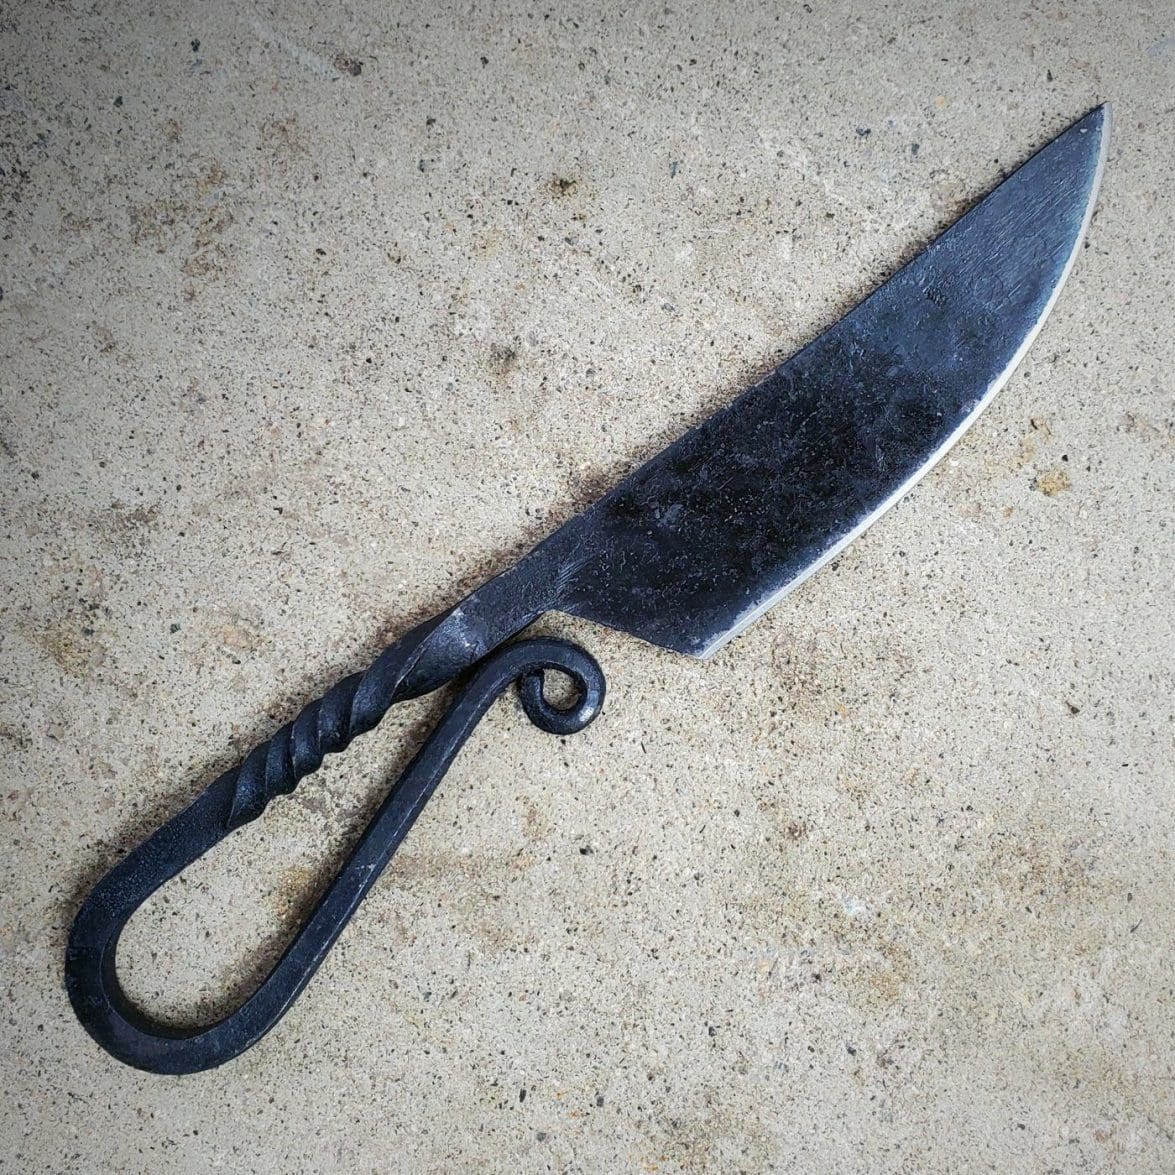 https://odditiesforsale.com/wp-content/uploads/2020/03/Dagger-Iron-Athame-Occult-Items-3-scaled-1.jpg